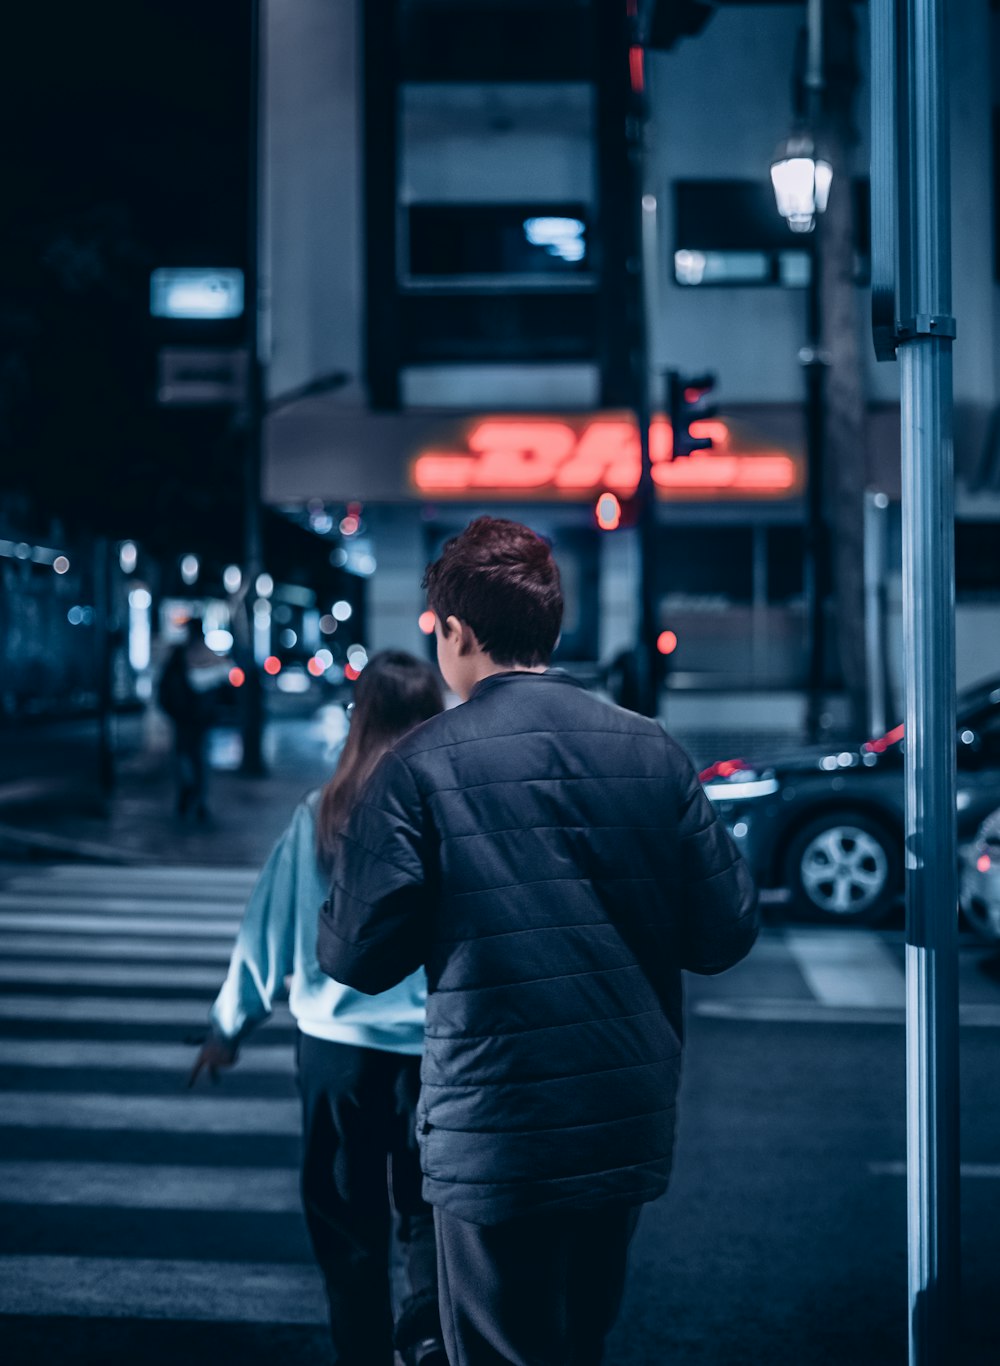 a man and a woman walking down a street at night